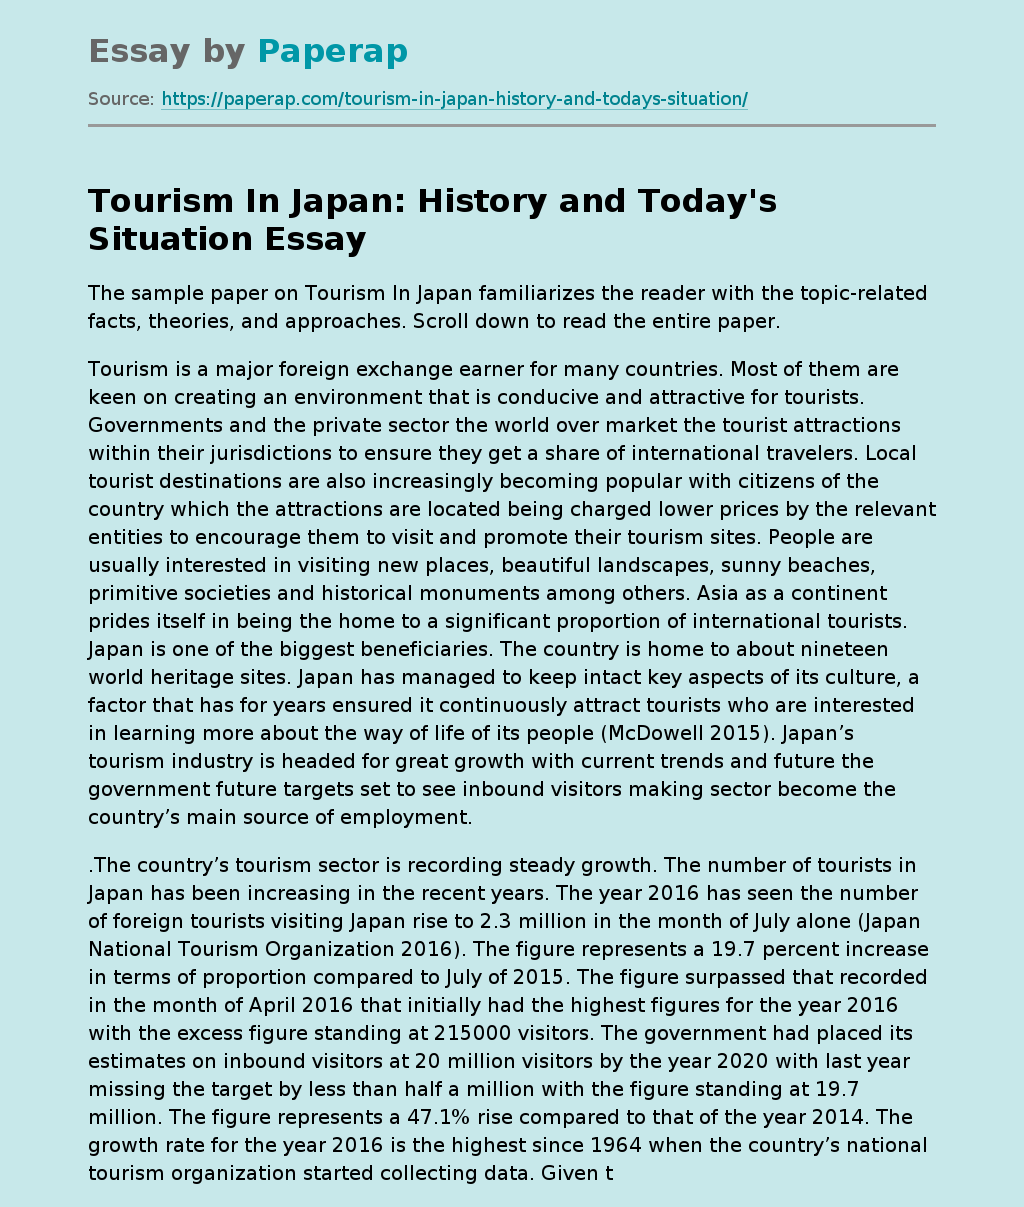 Tourism In Japan: History and Today's Situation